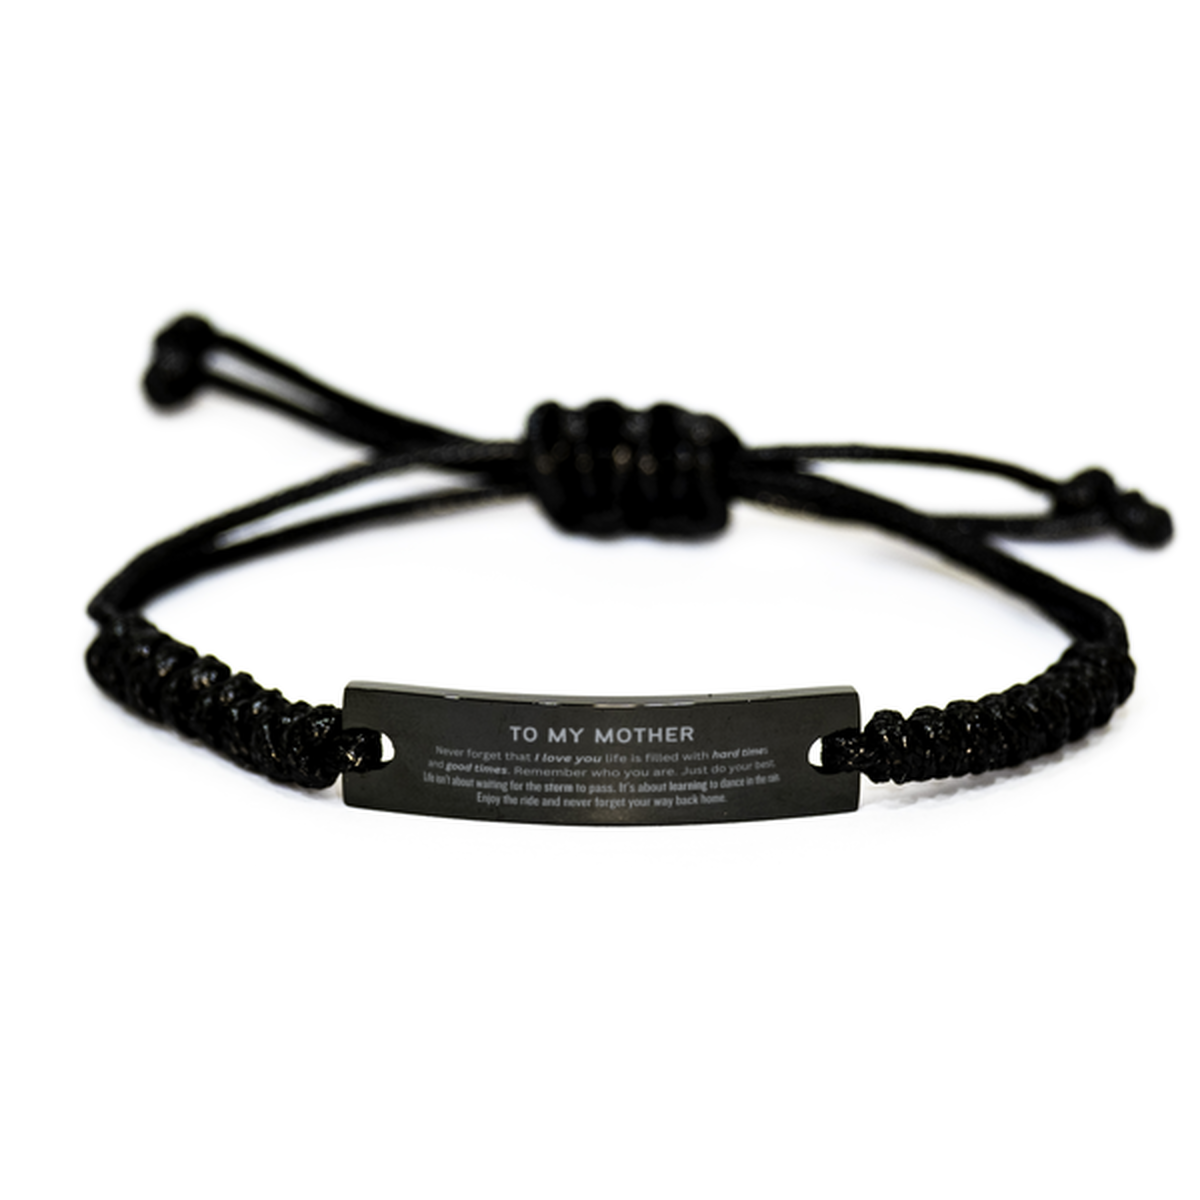 Christmas Mother Black Rope Bracelet Gifts, To My Mother Birthday Thank You Gifts For Mother, Graduation Unique Gifts For Mother To My Mother Never forget that I love you life is filled with hard times and good times. Remember who you are. Just do your be